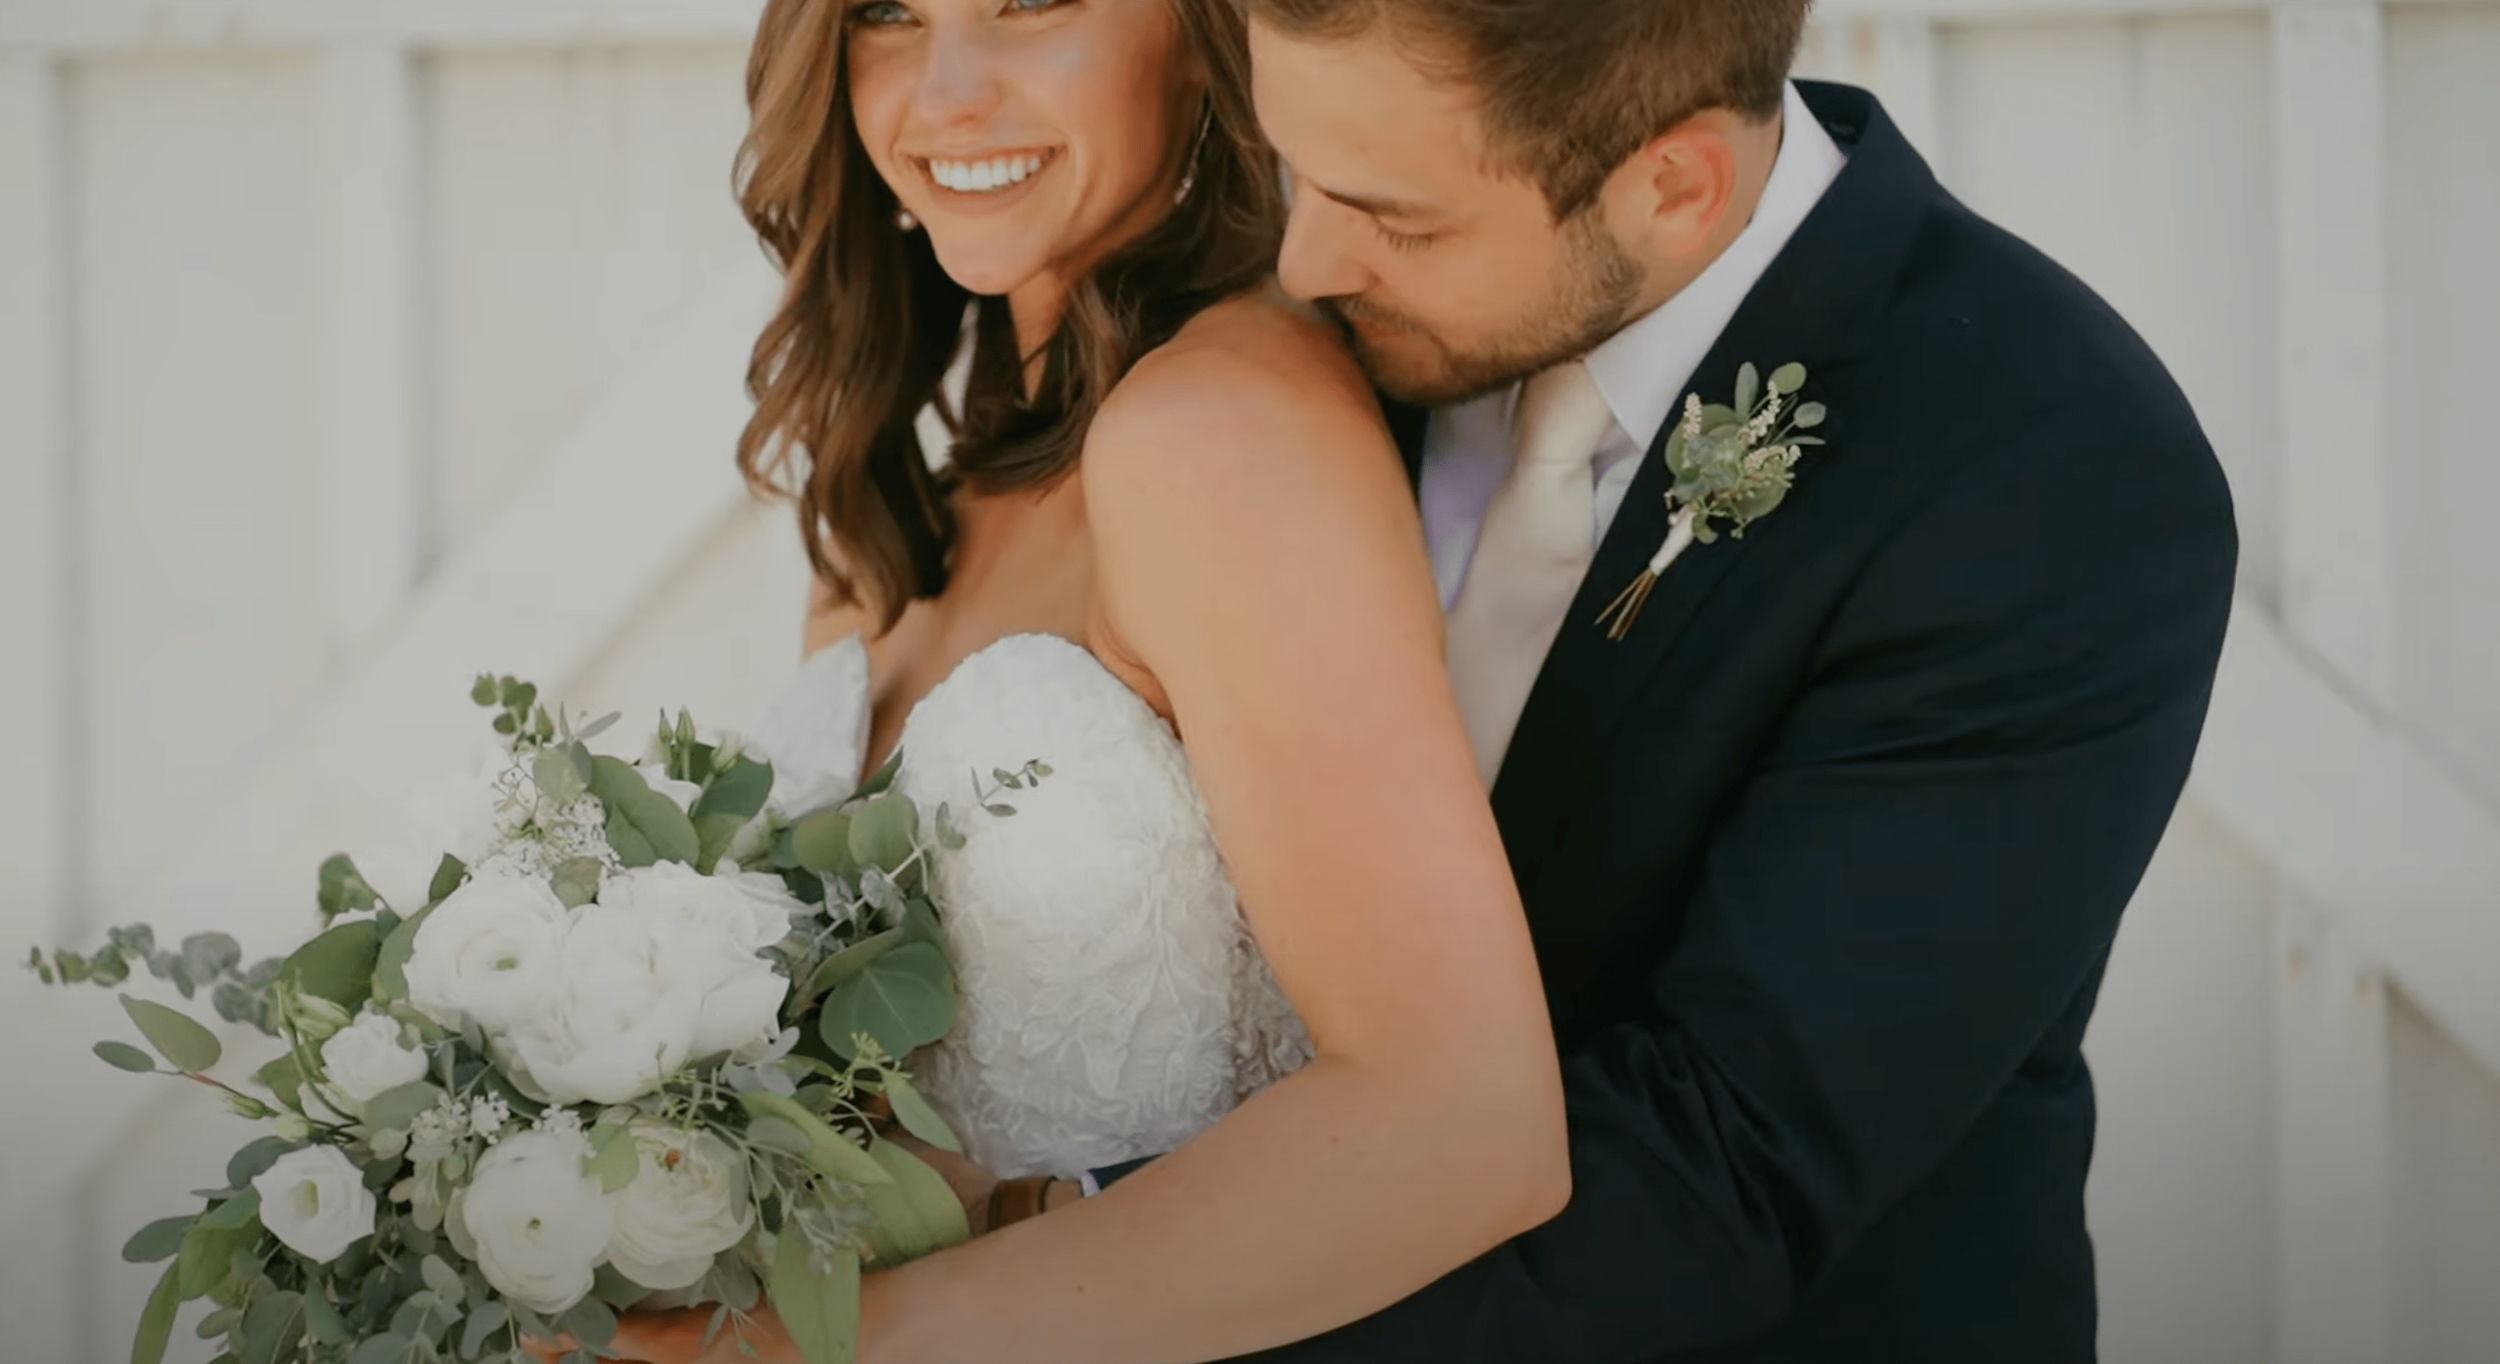 groom embraces bride as she holds bouquet